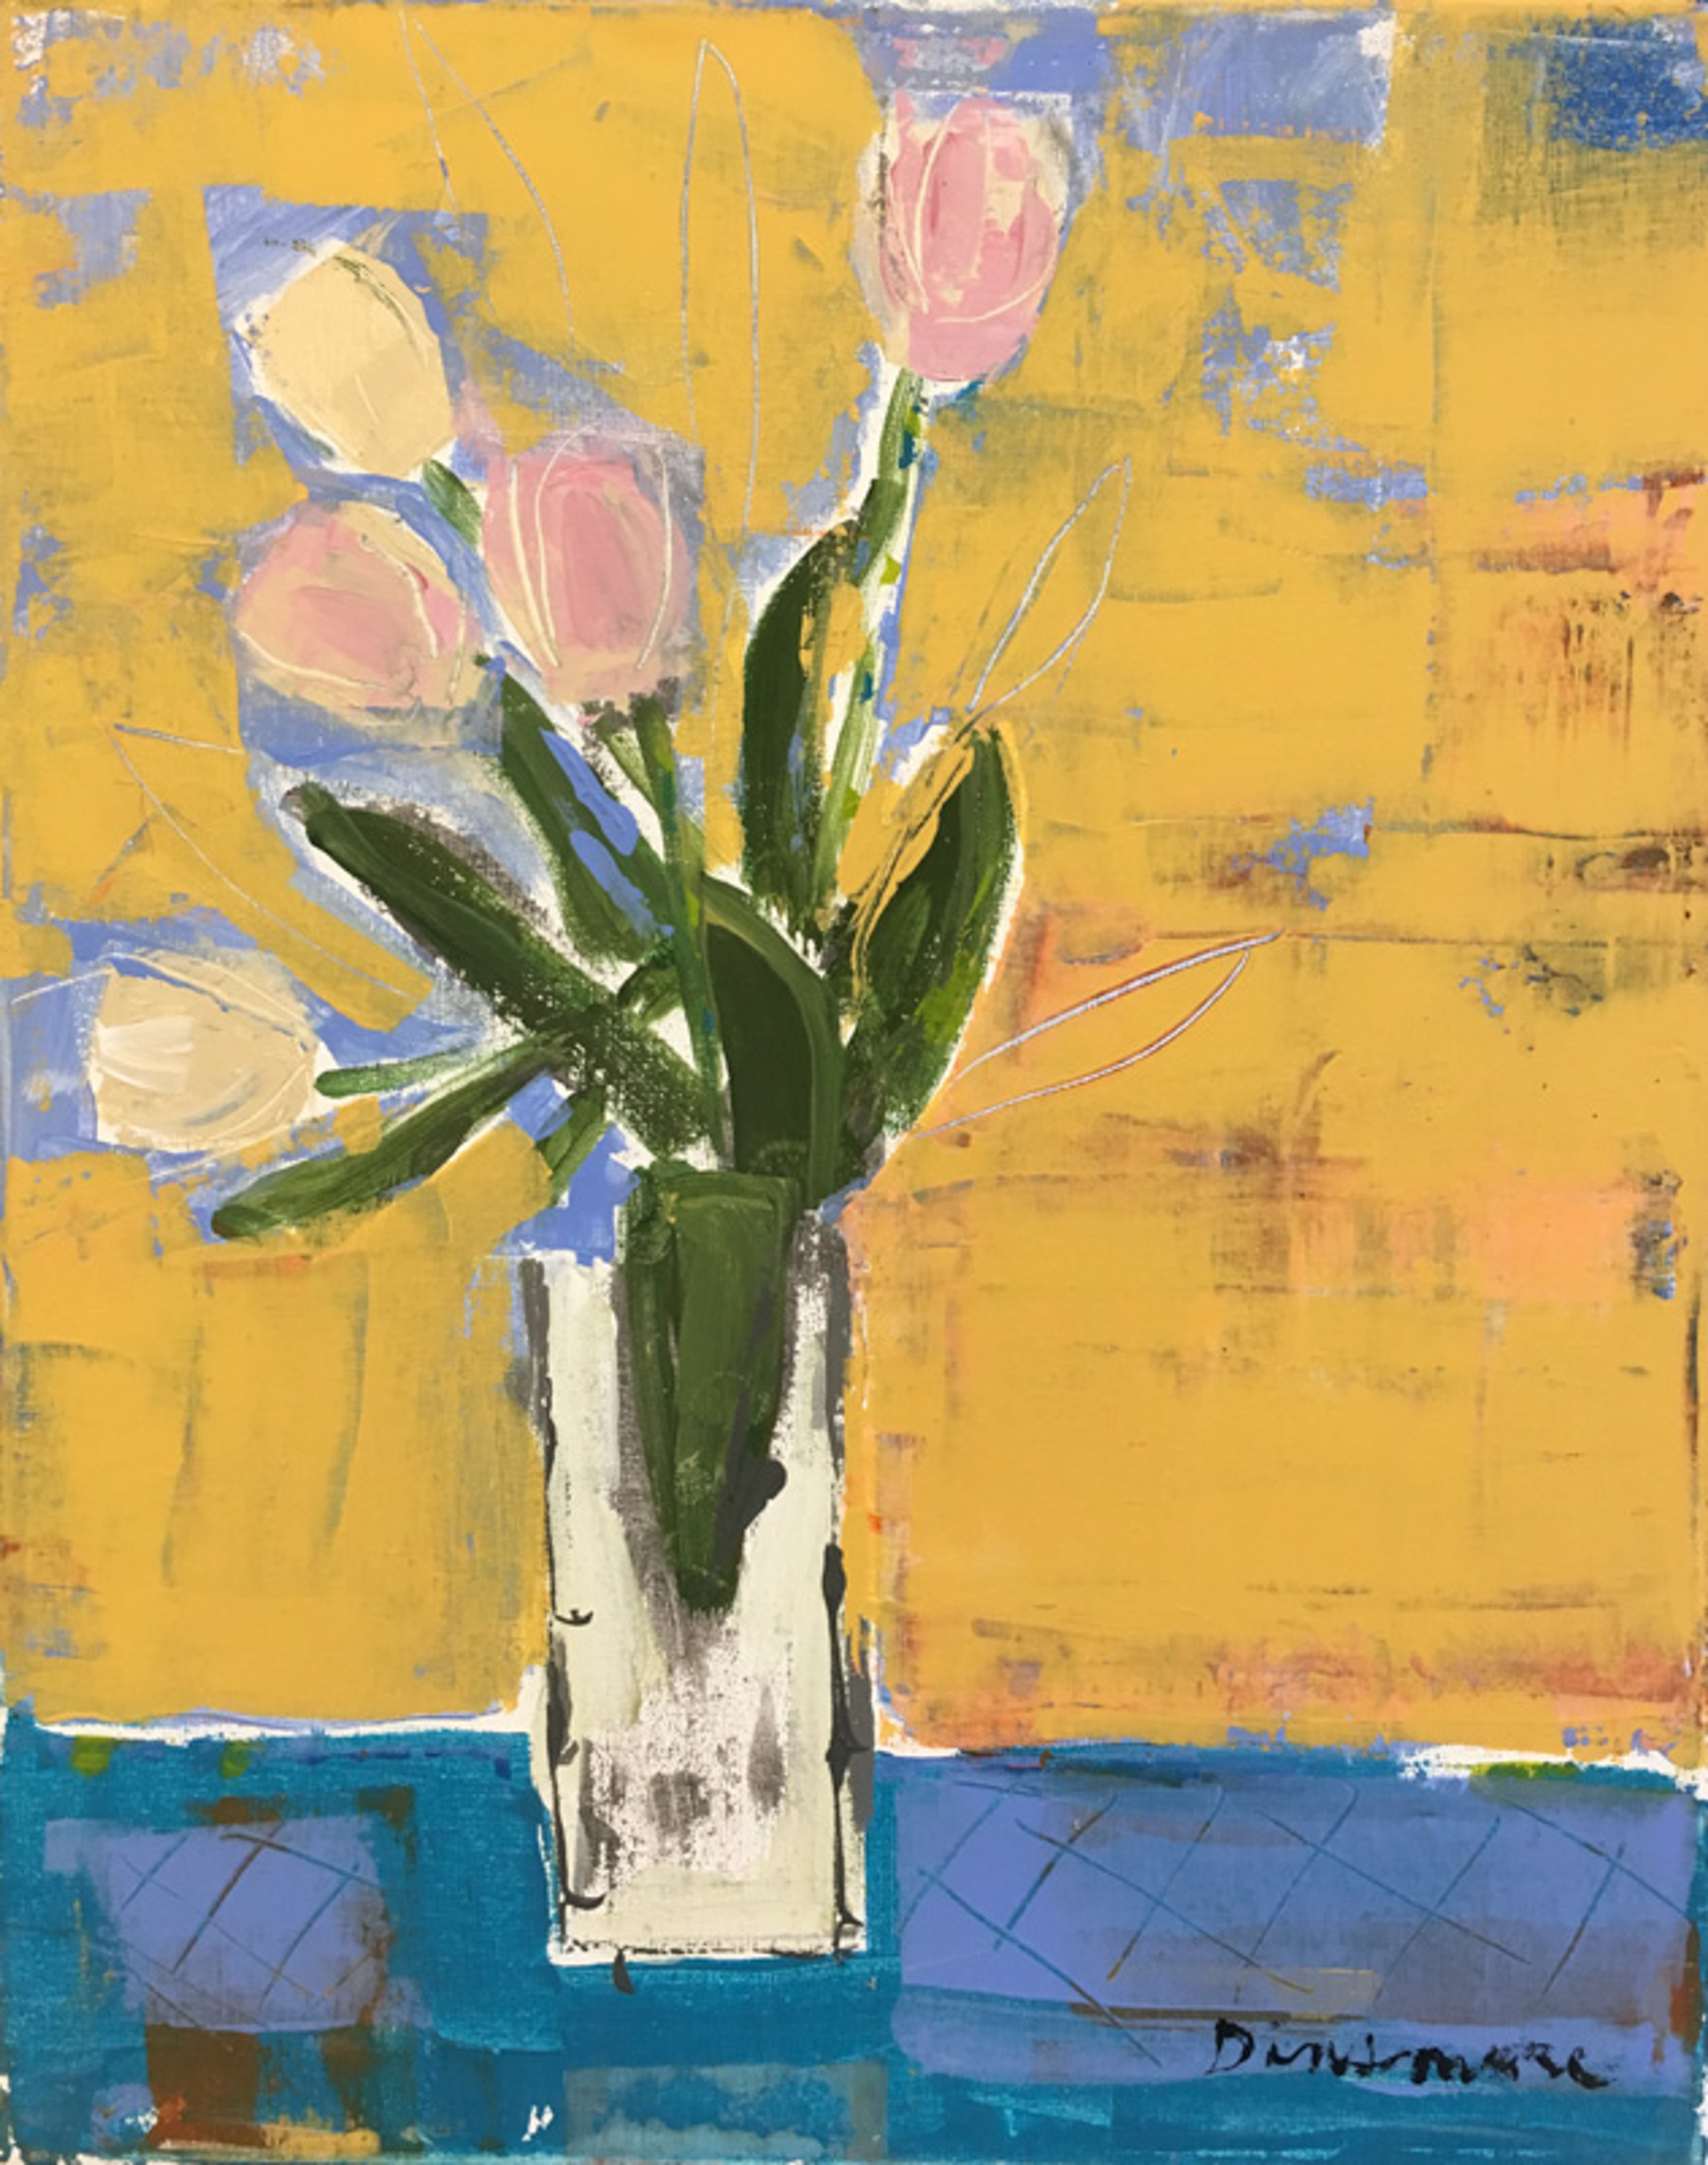 Five Tulips by Stephen Dinsmore